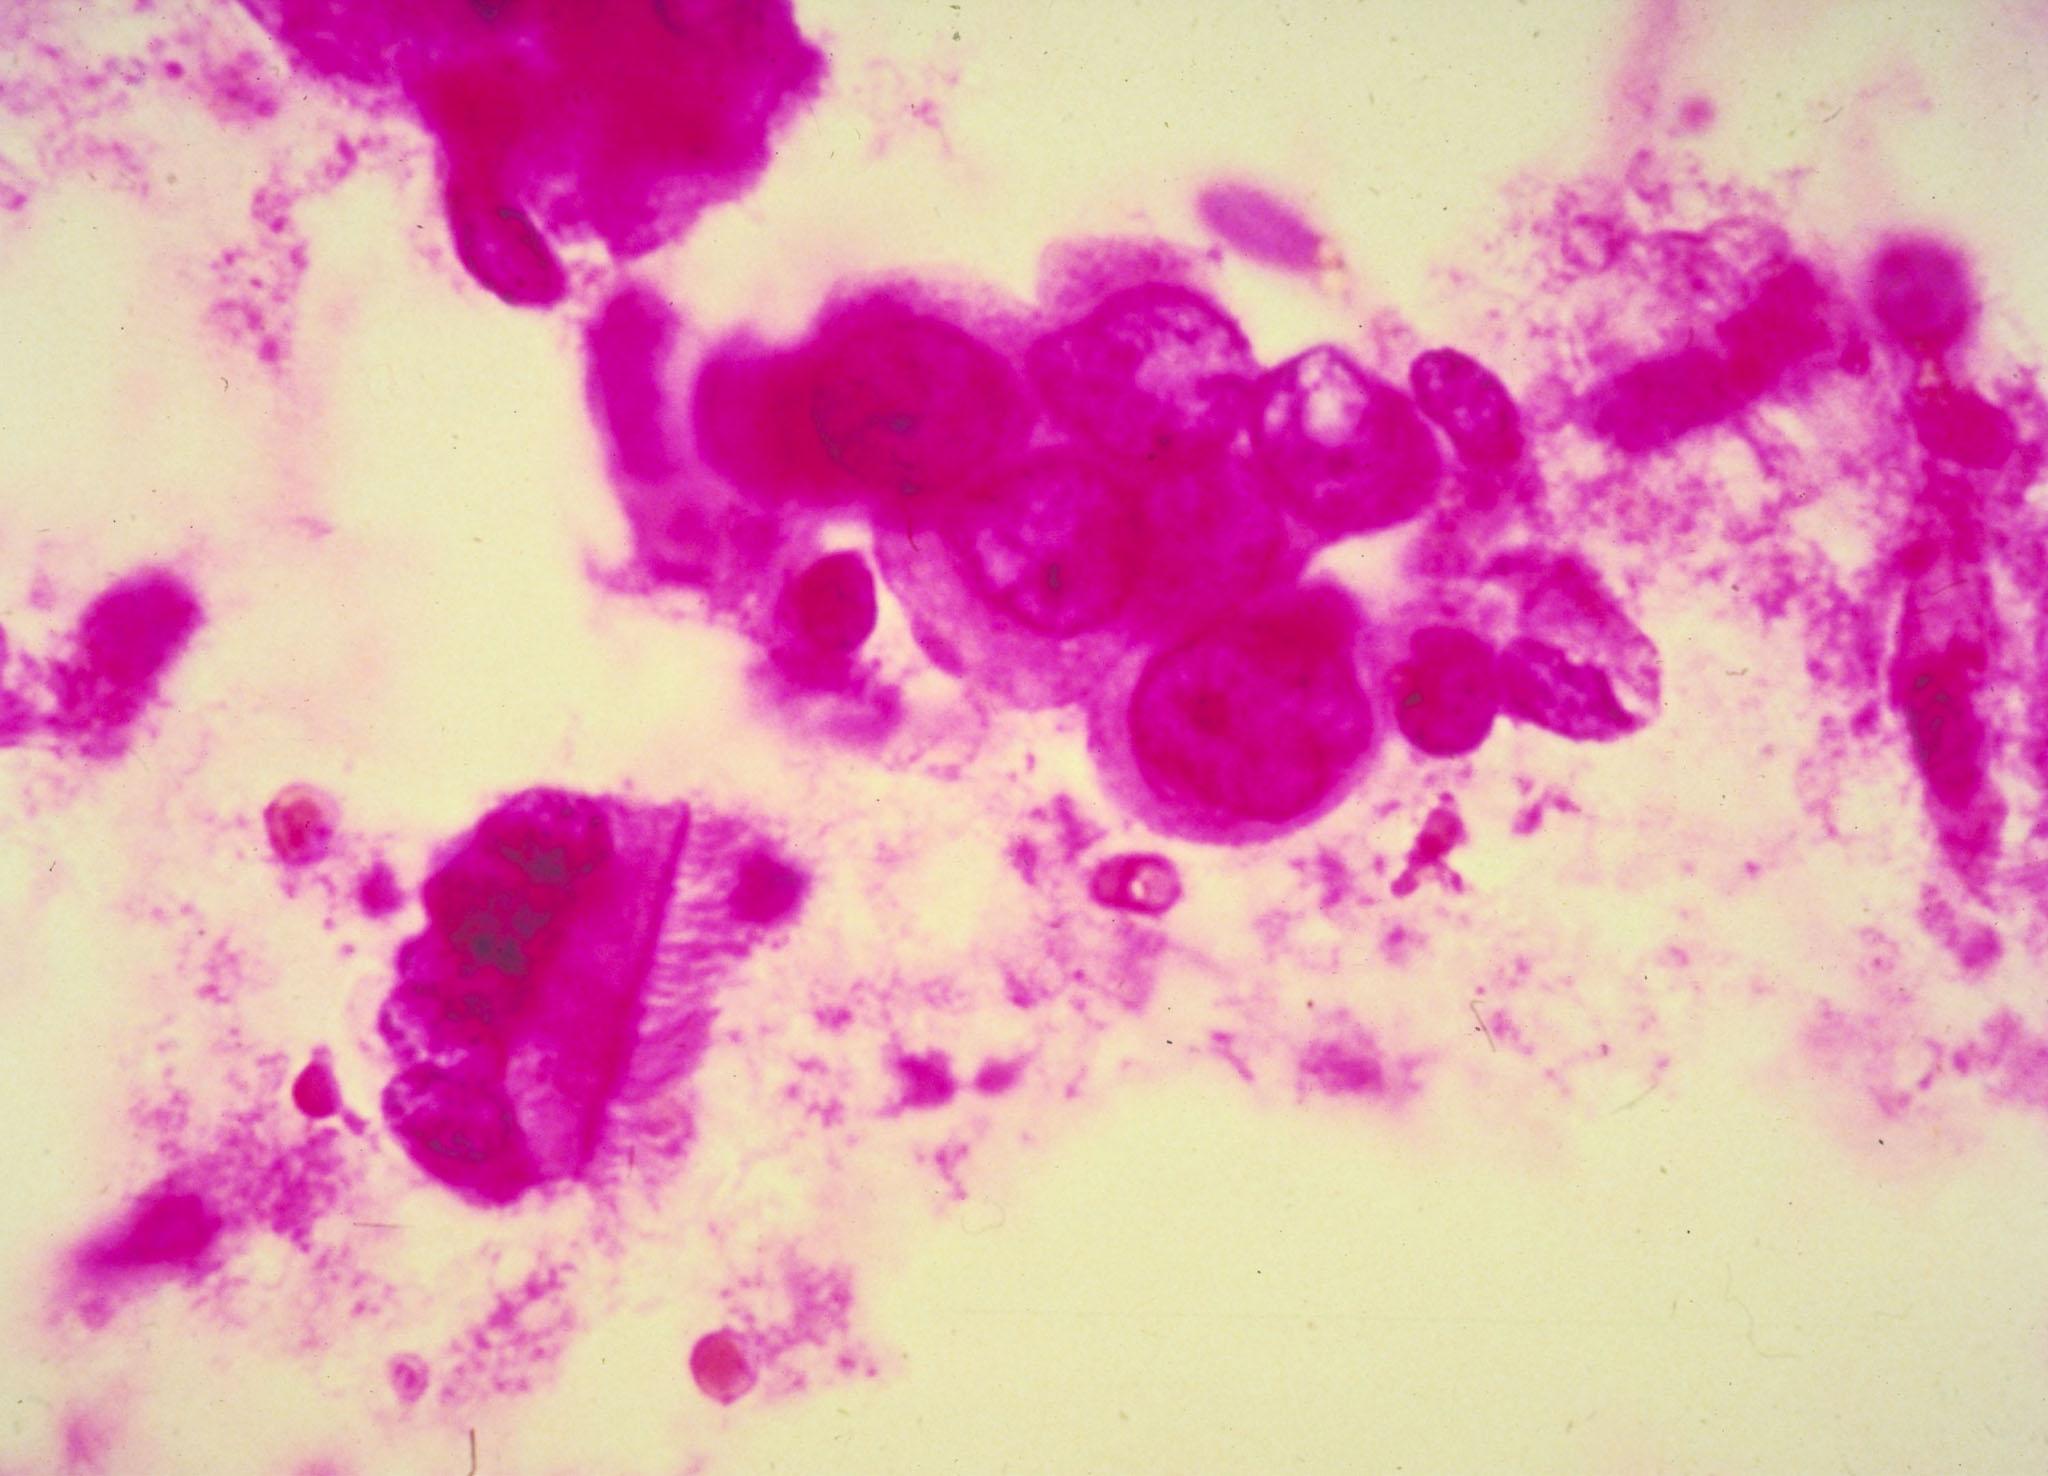 Detail of breast cancer cells. Breast cancer is a malignant growth that begins in the tissues of the breast. Over a lifetime, one in eight women is diagnosed with breast cancer